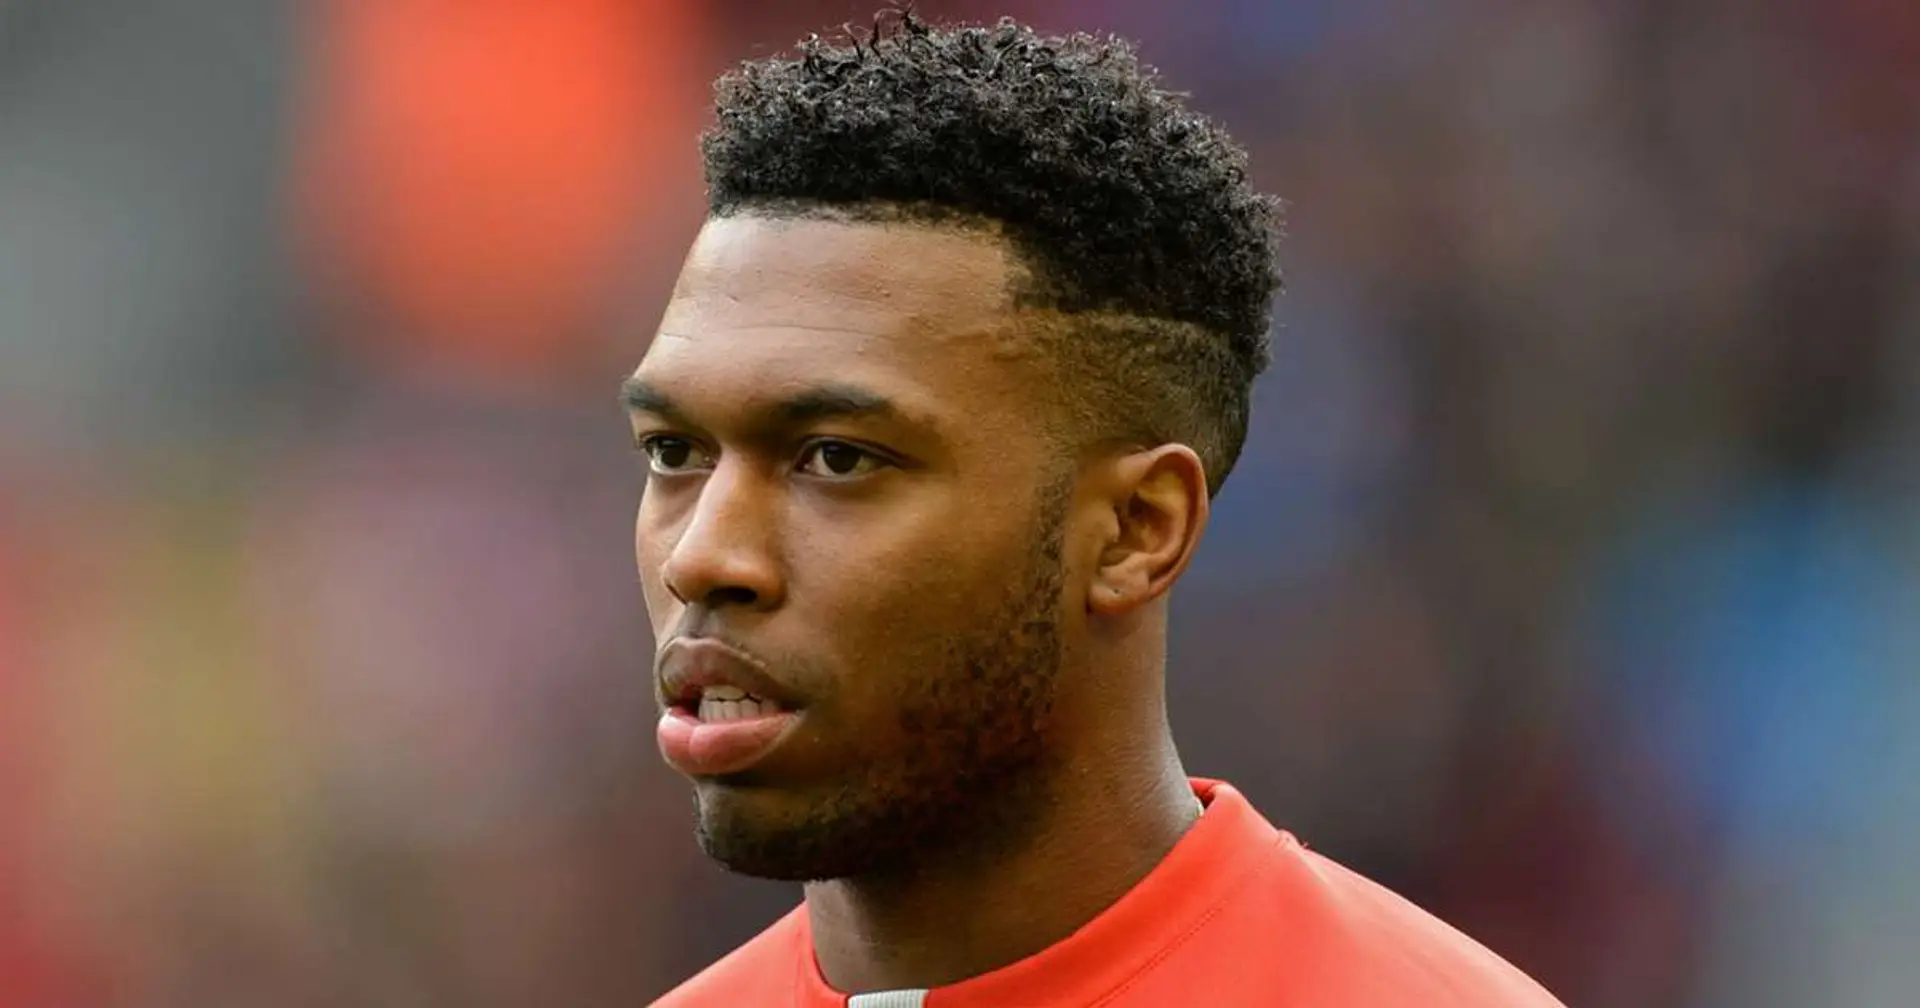 Sturridge opens up on injury hell: 'I'd pay any amount of money to just play'